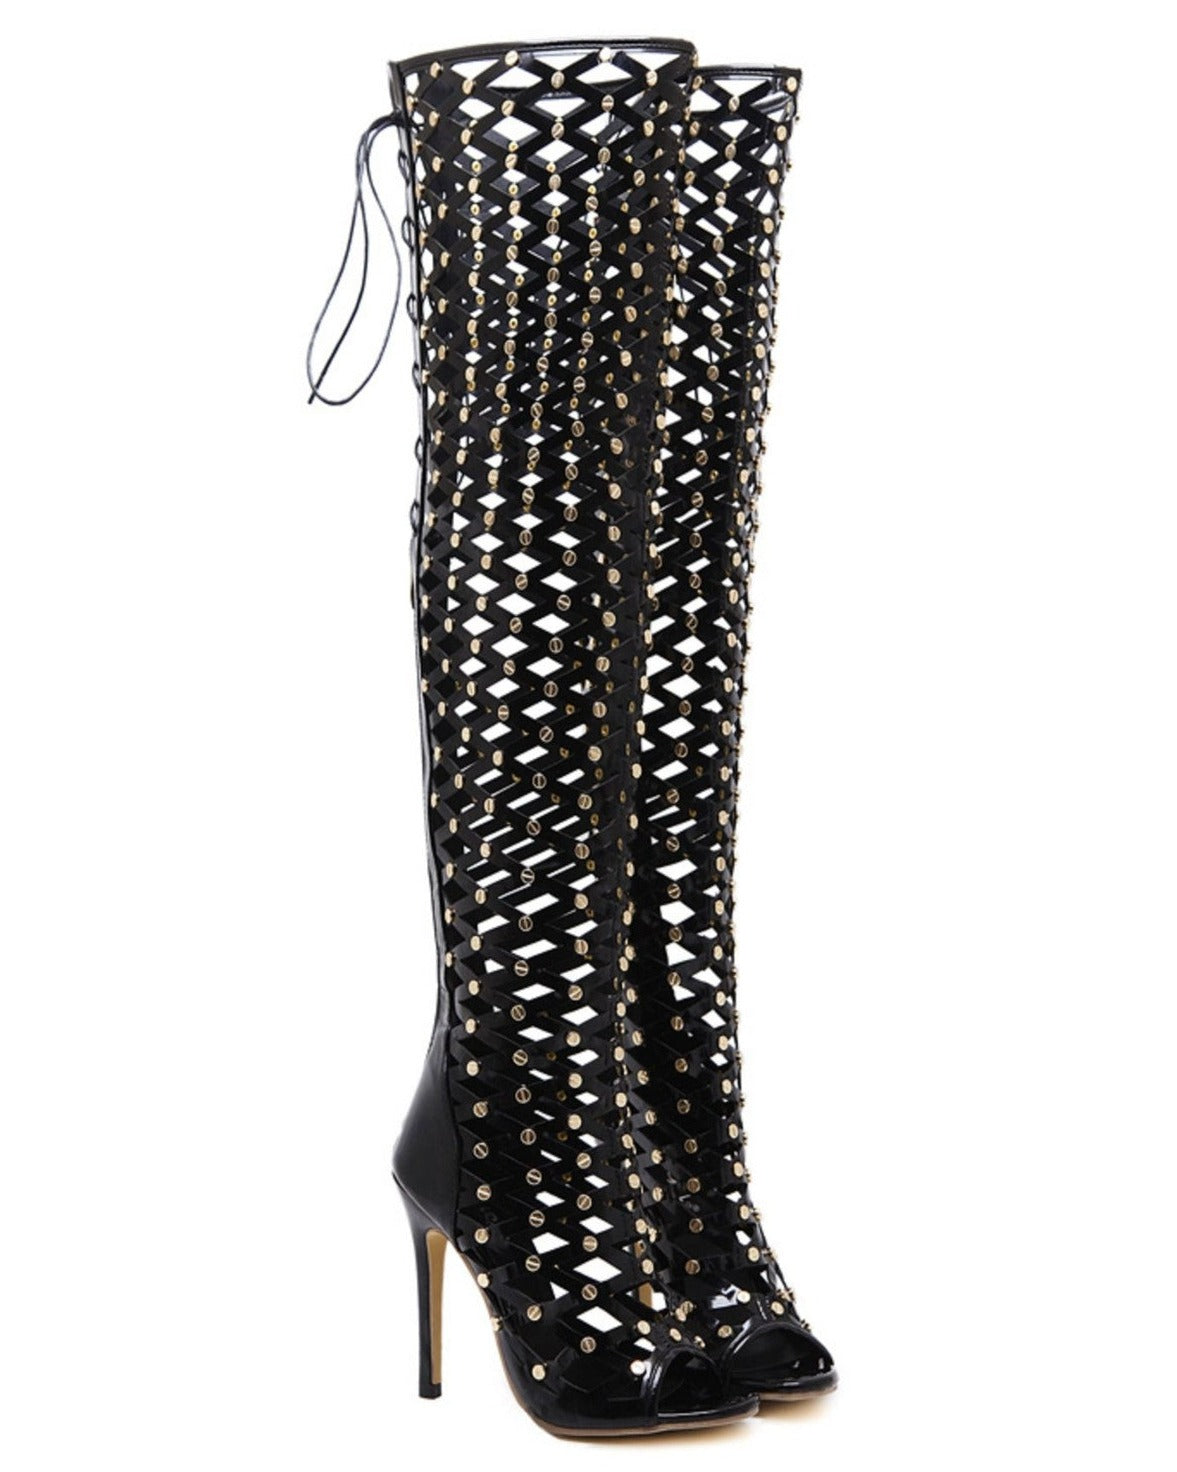 Domina Thigh High Caged Heel shoes LAVAH   